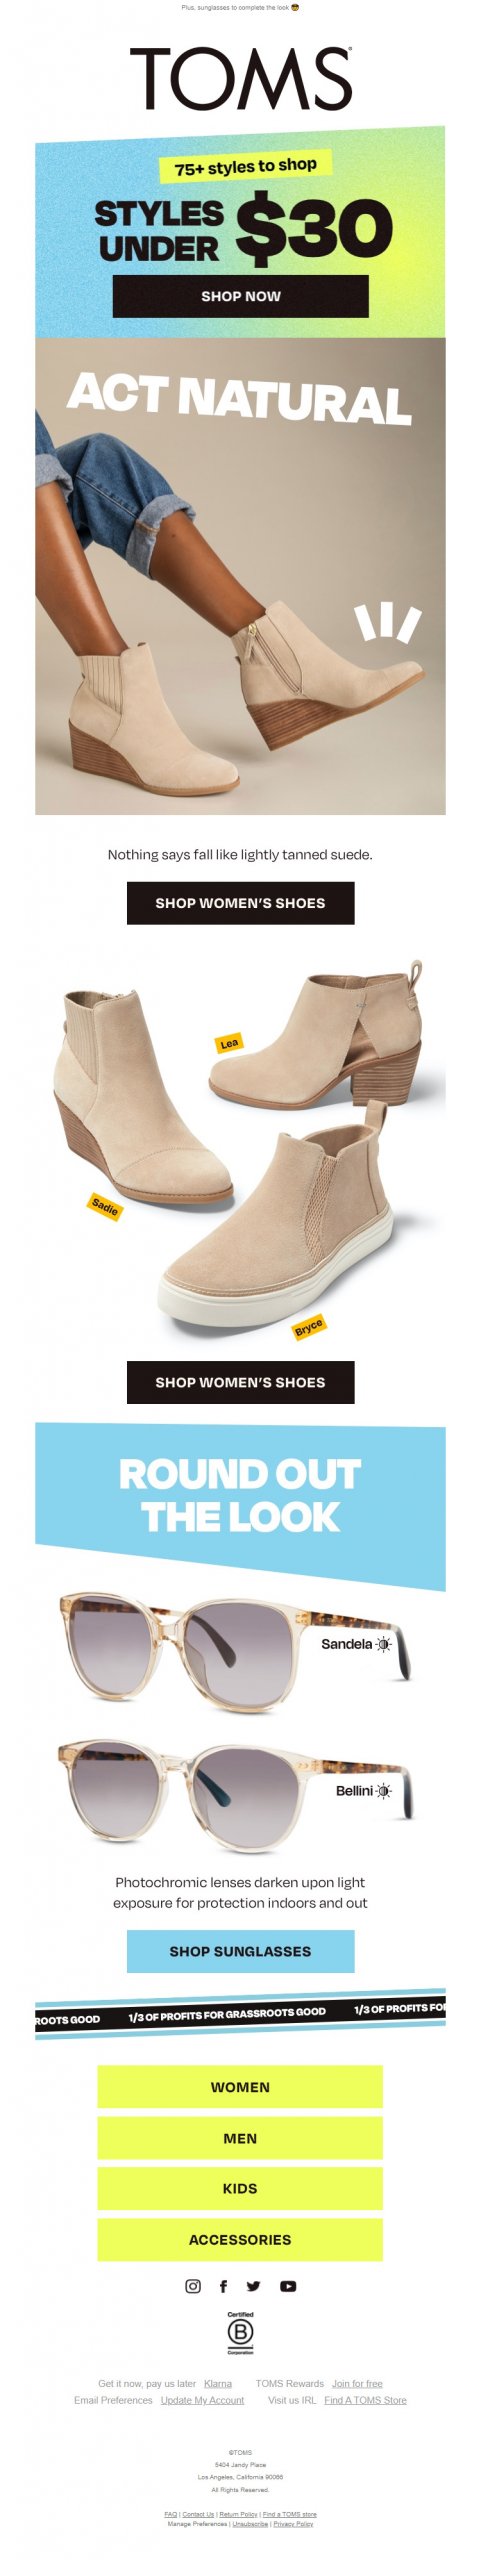 TOMS email sample 3